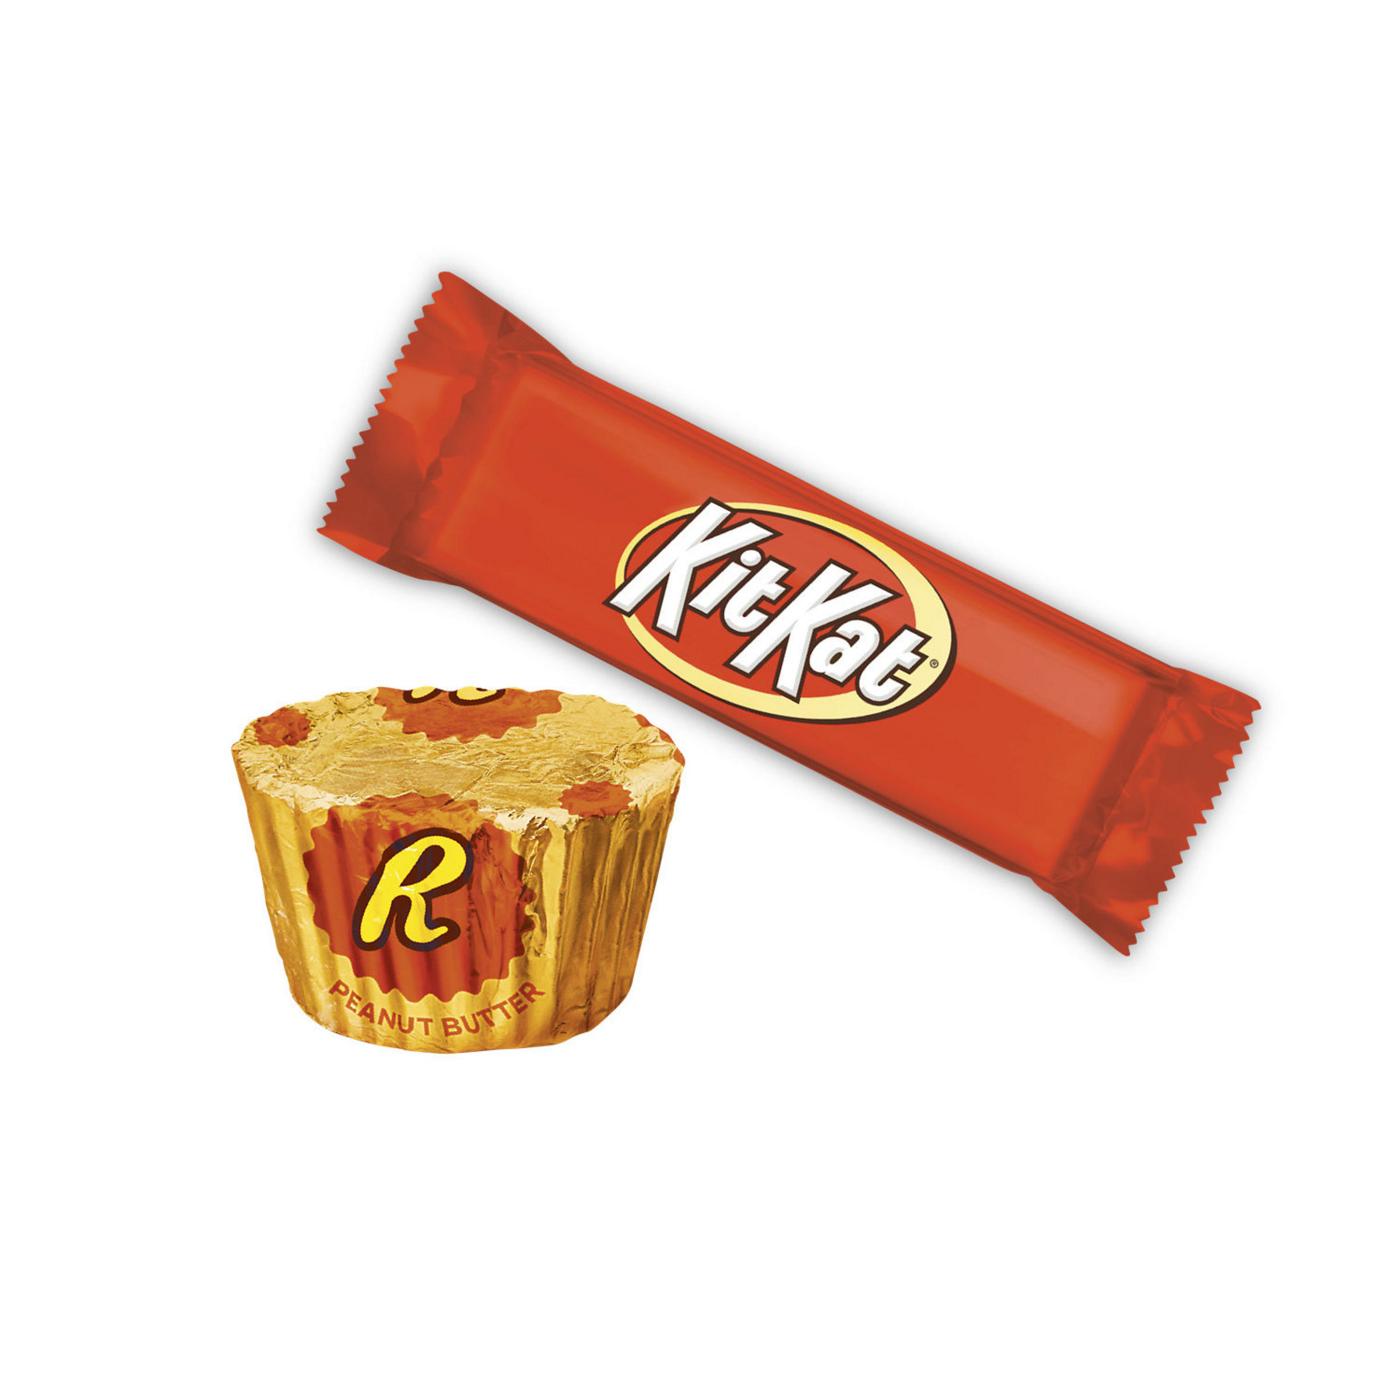 Hershey's Reese's & Kit Kat Miniature Size Chocolate, Family Pack; image 4 of 5